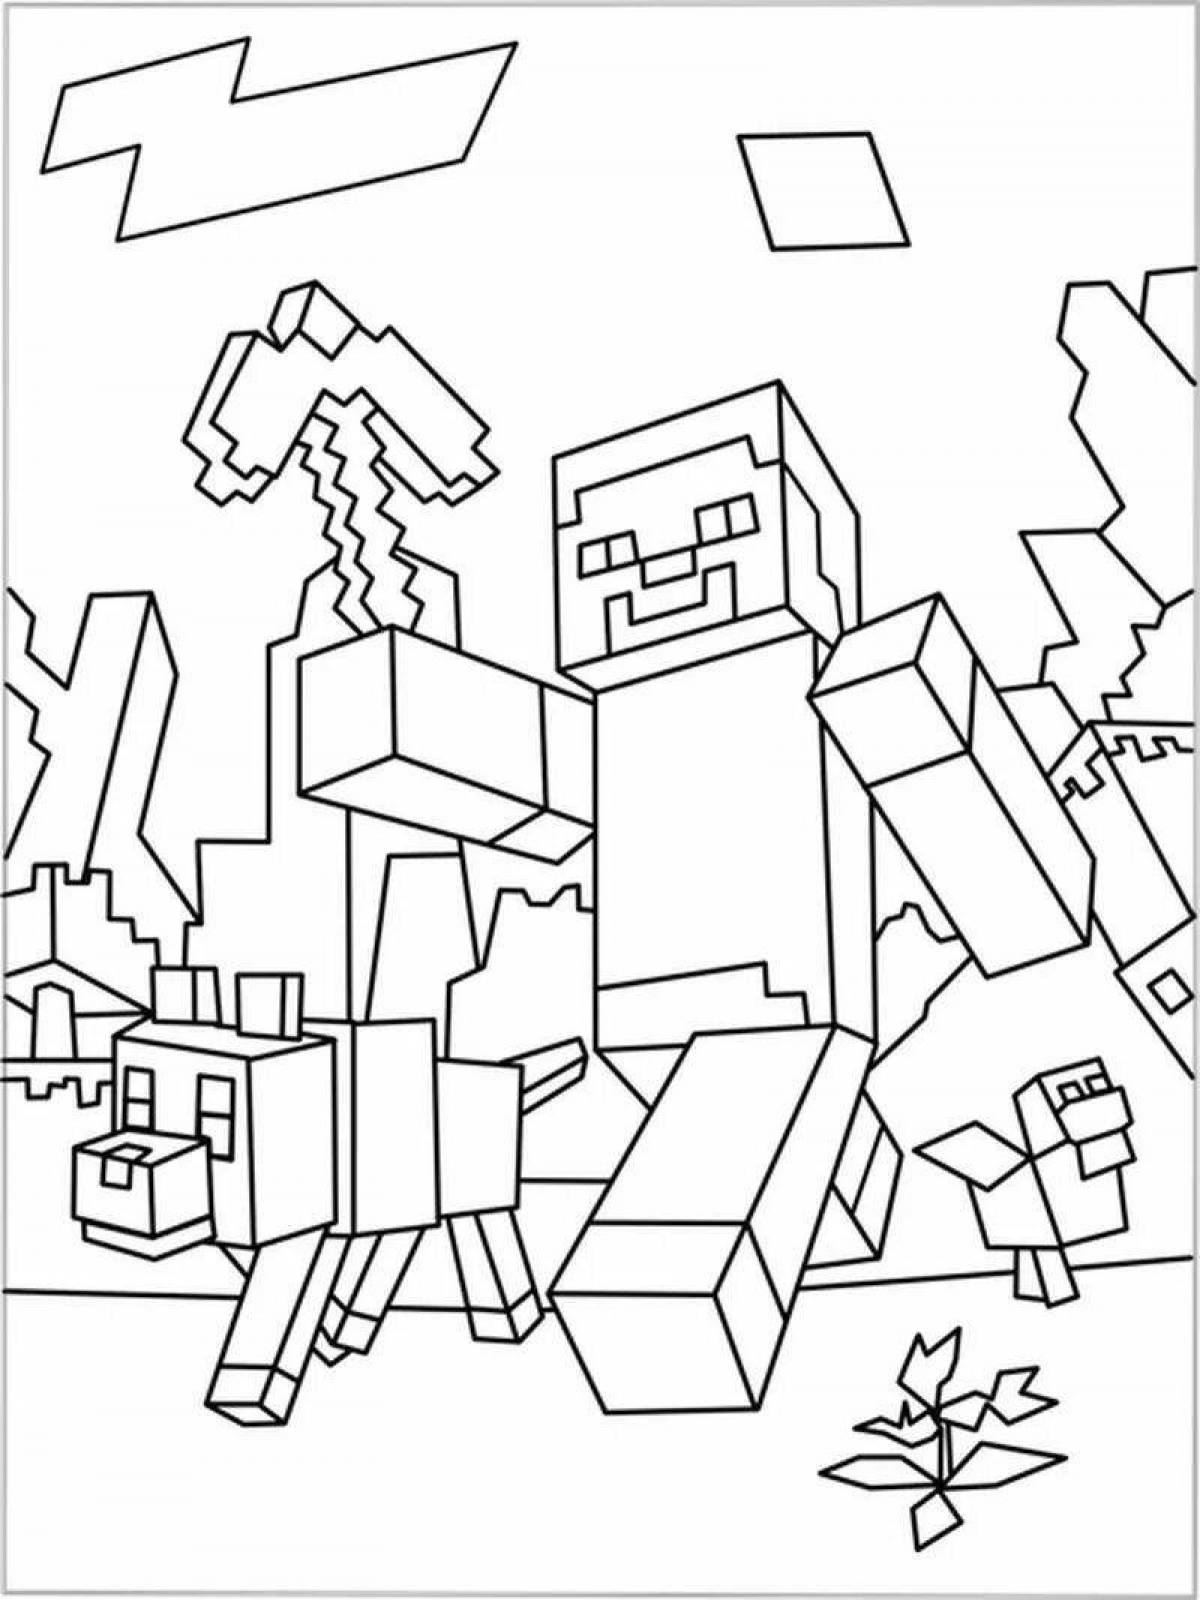 Color-explosive minecraft things coloring page